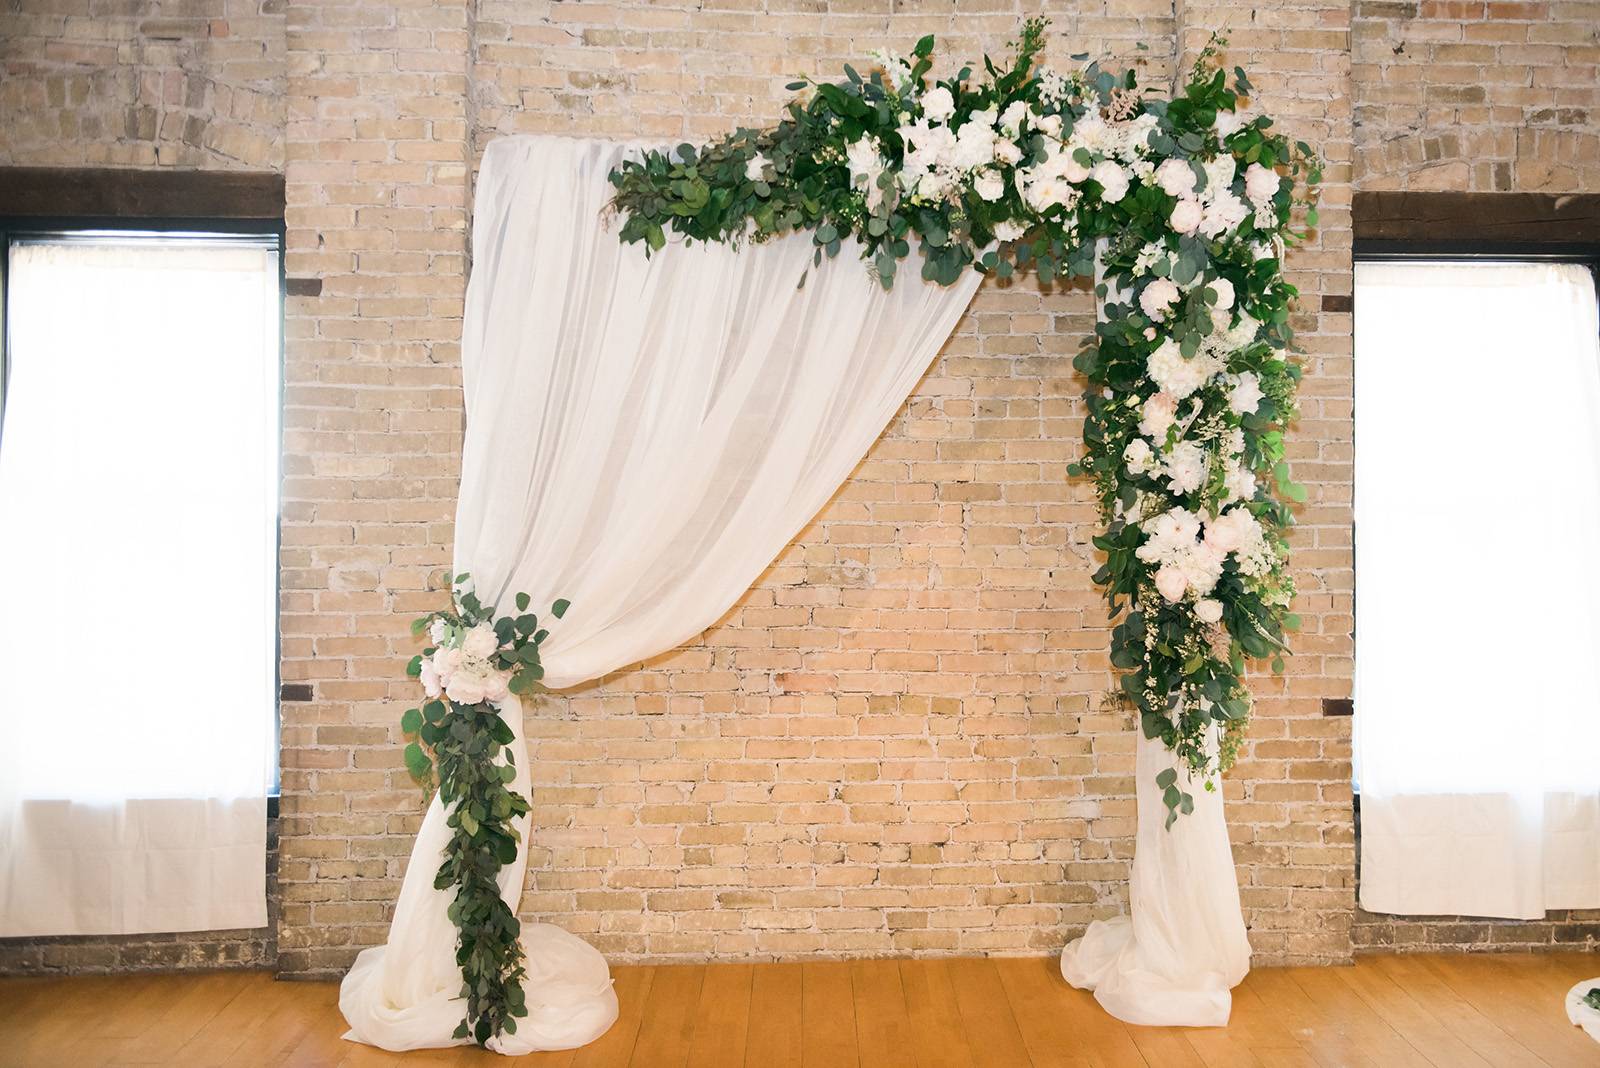 ceremony arch arbor draping flowers floral blooms